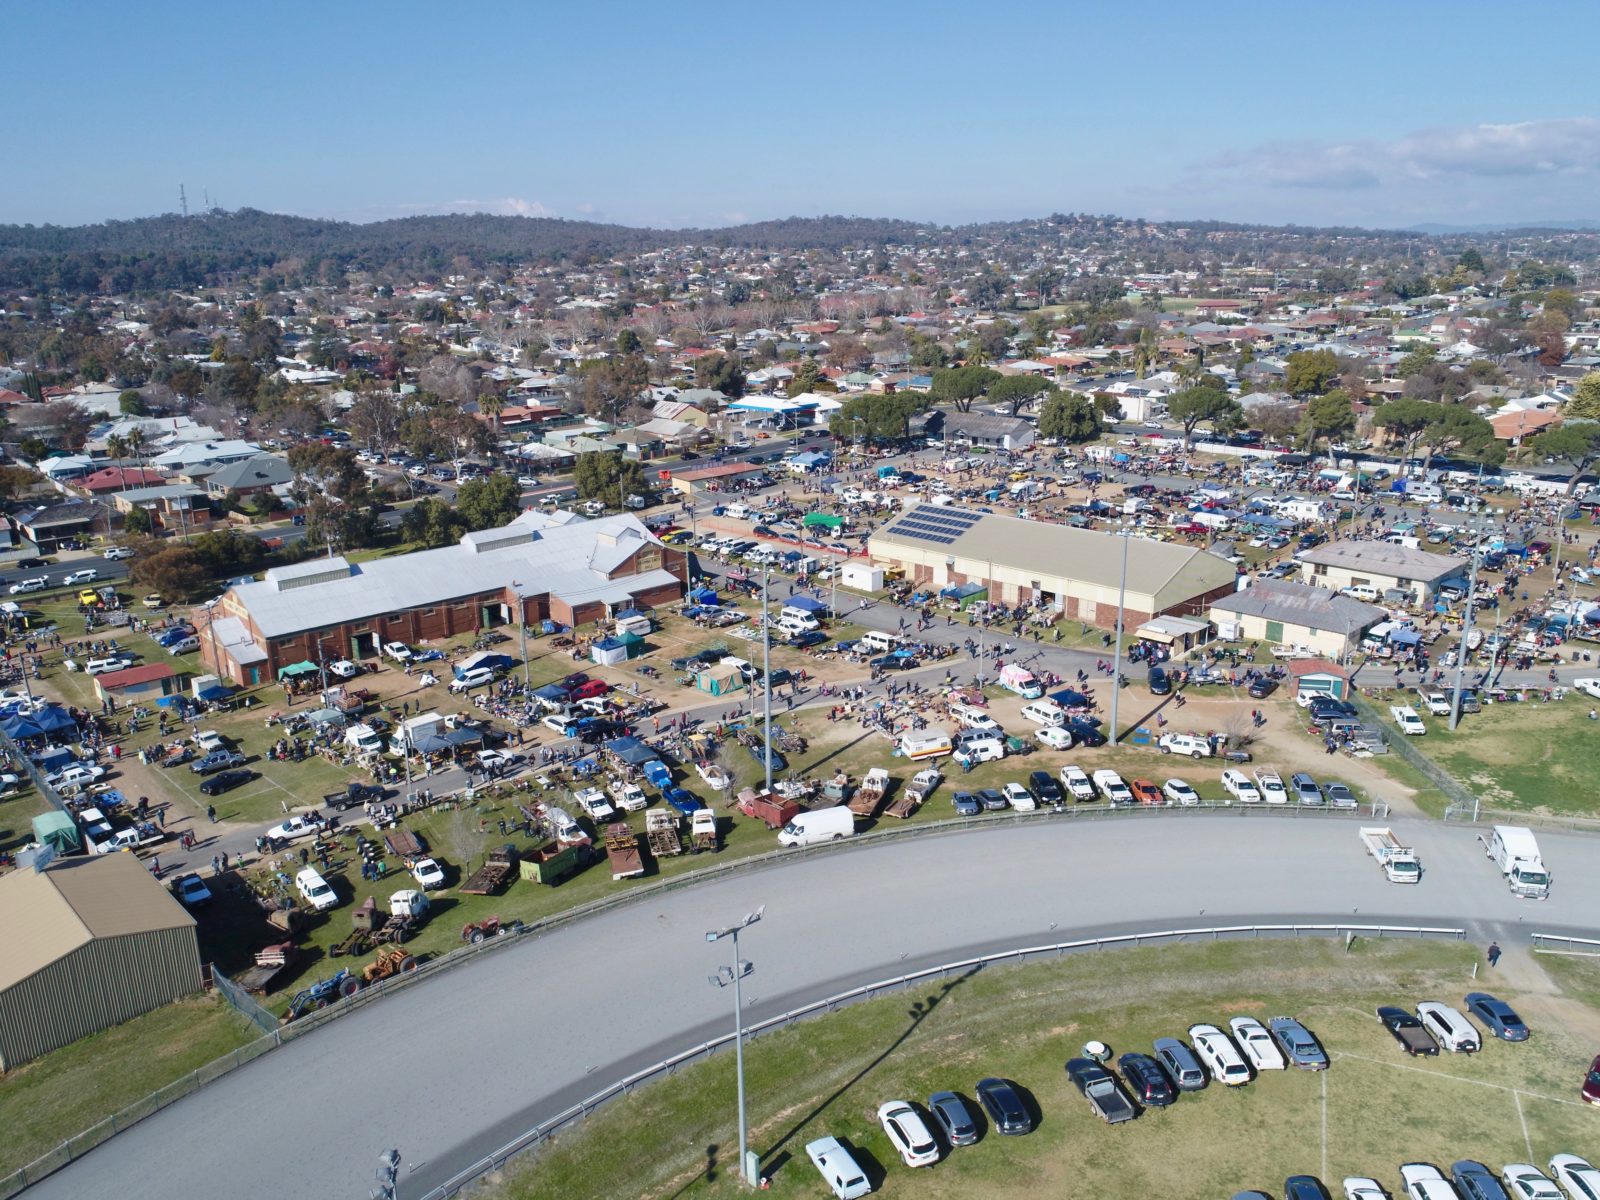 Photo taken from a drone of Wagga Wagga Swap Meet 2019